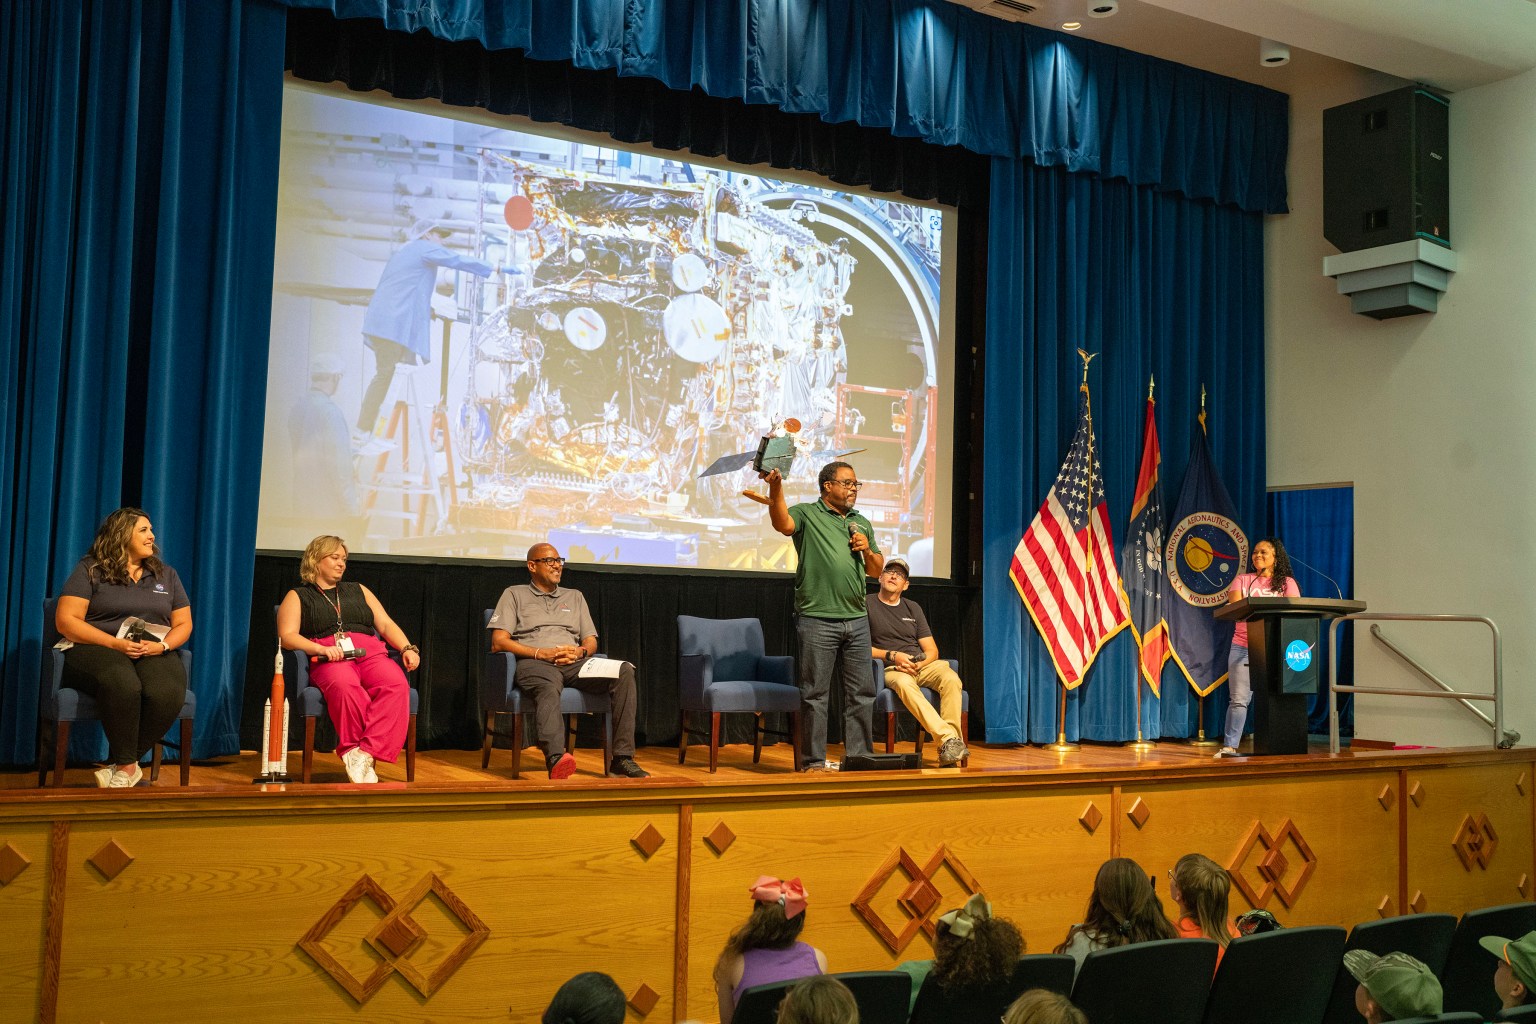 Clyde Conerly, one of the five panelists, shows a satellite replica to the young audience.